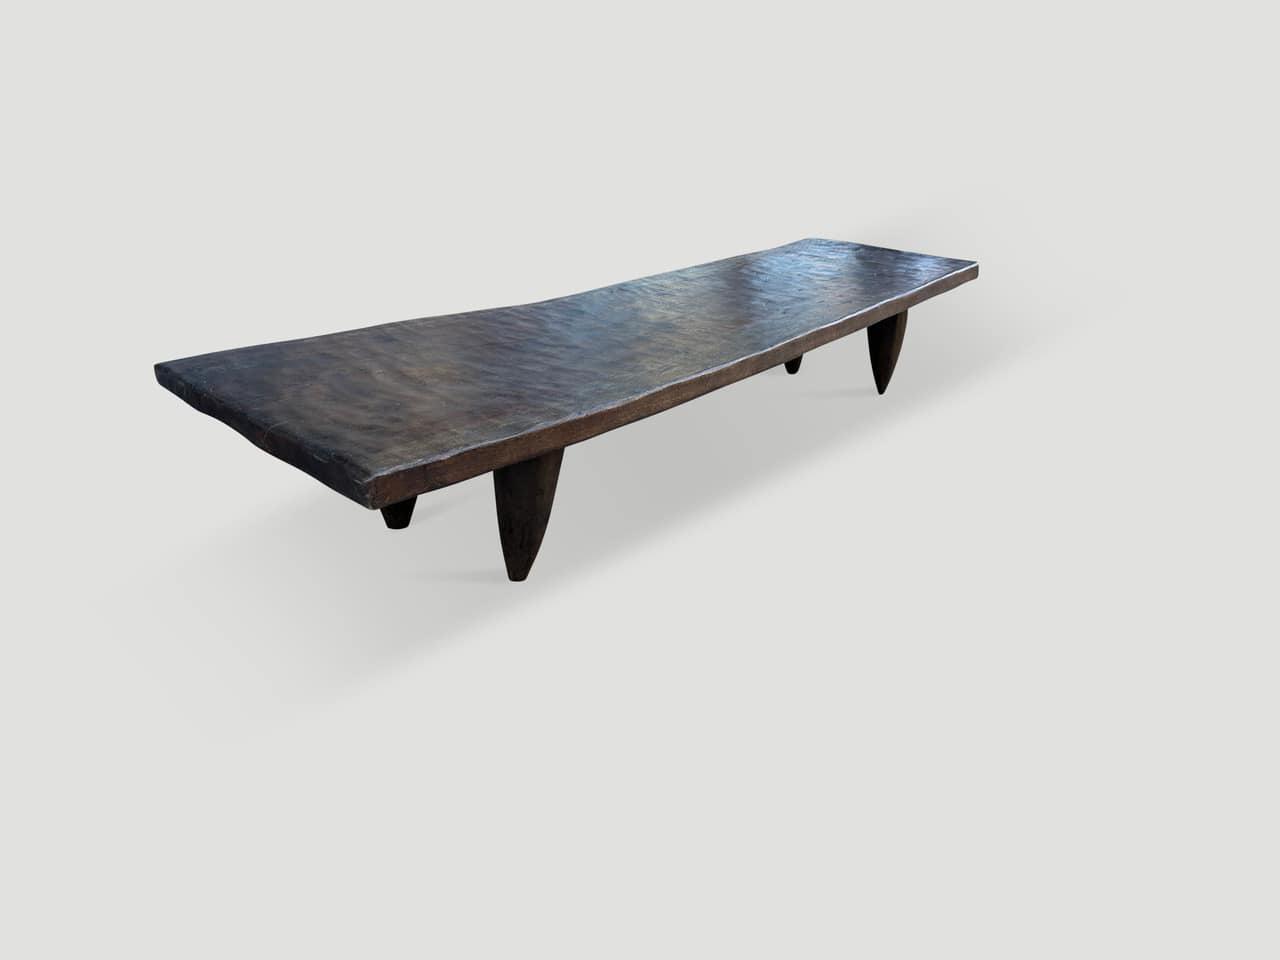 iron wood antique African bench